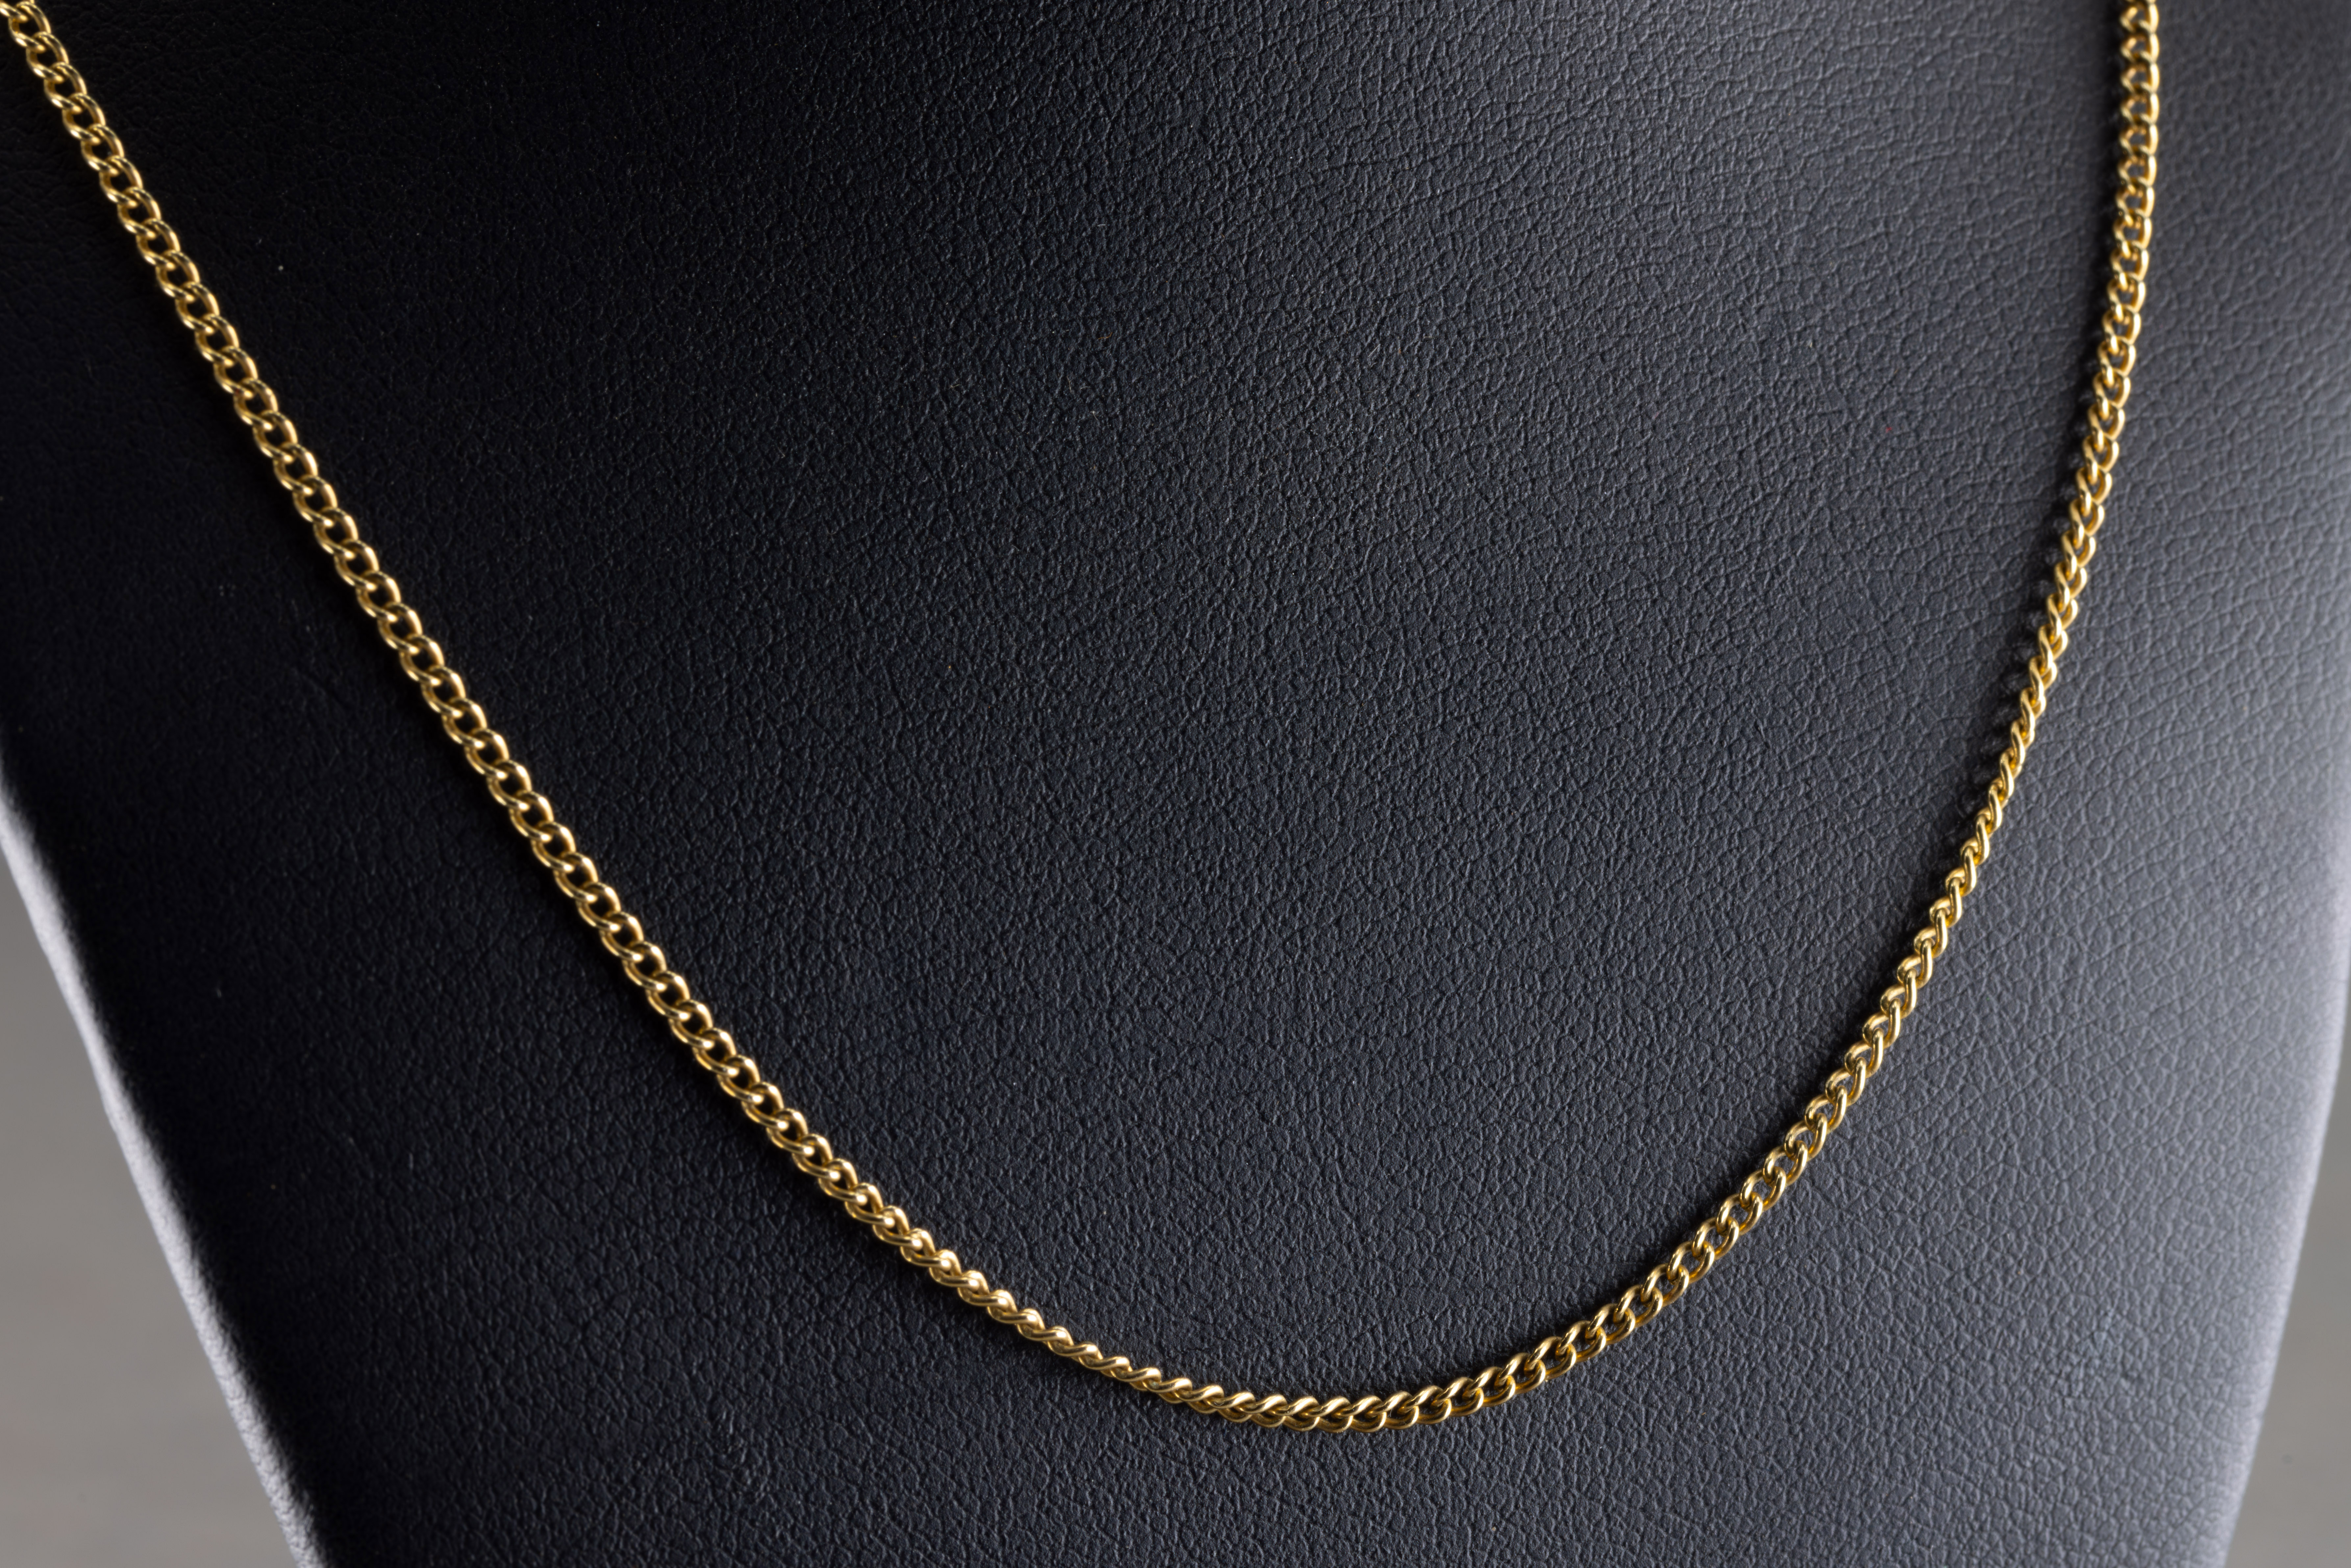 A 9ct yellow gold chain